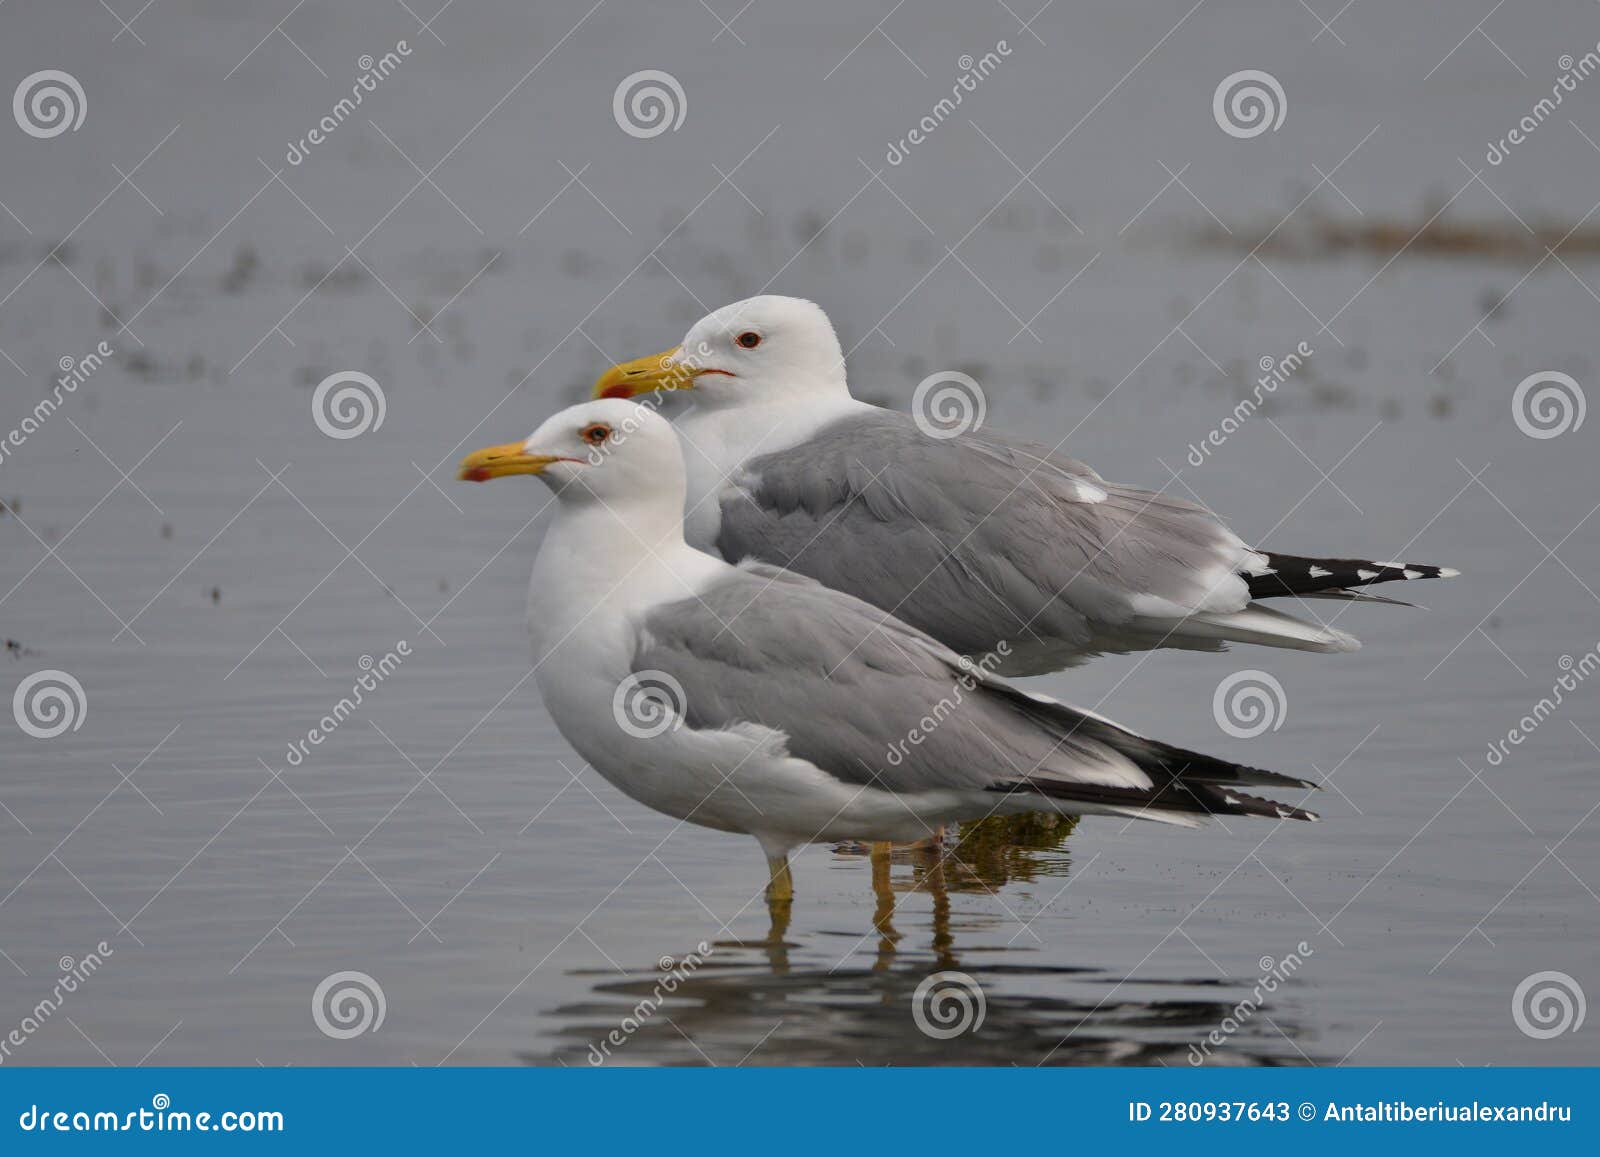 close-up view with two seagulls on lake matita in the danube delta, romania